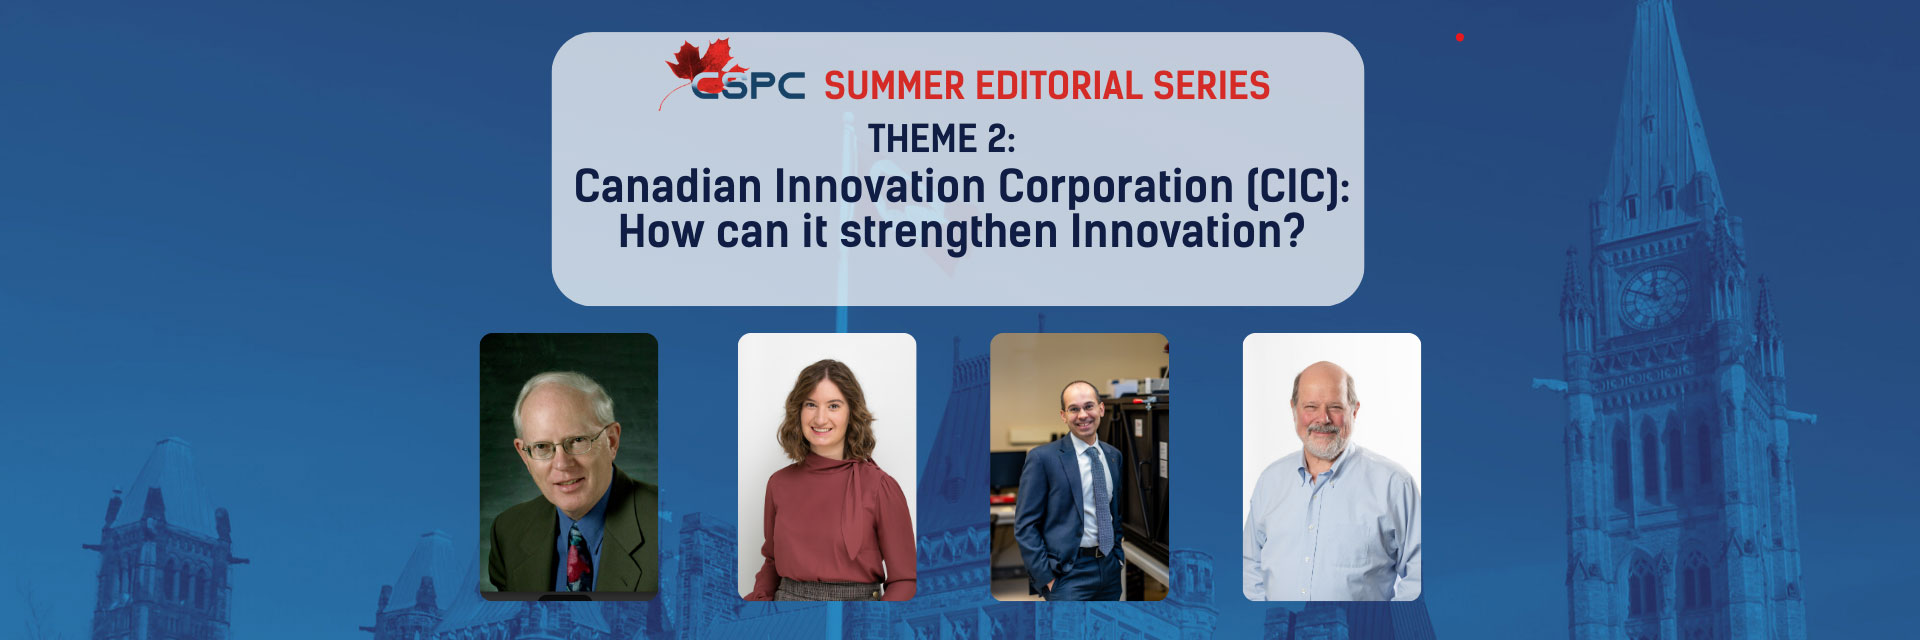 Canadian Innovation Corporation editorial series banner